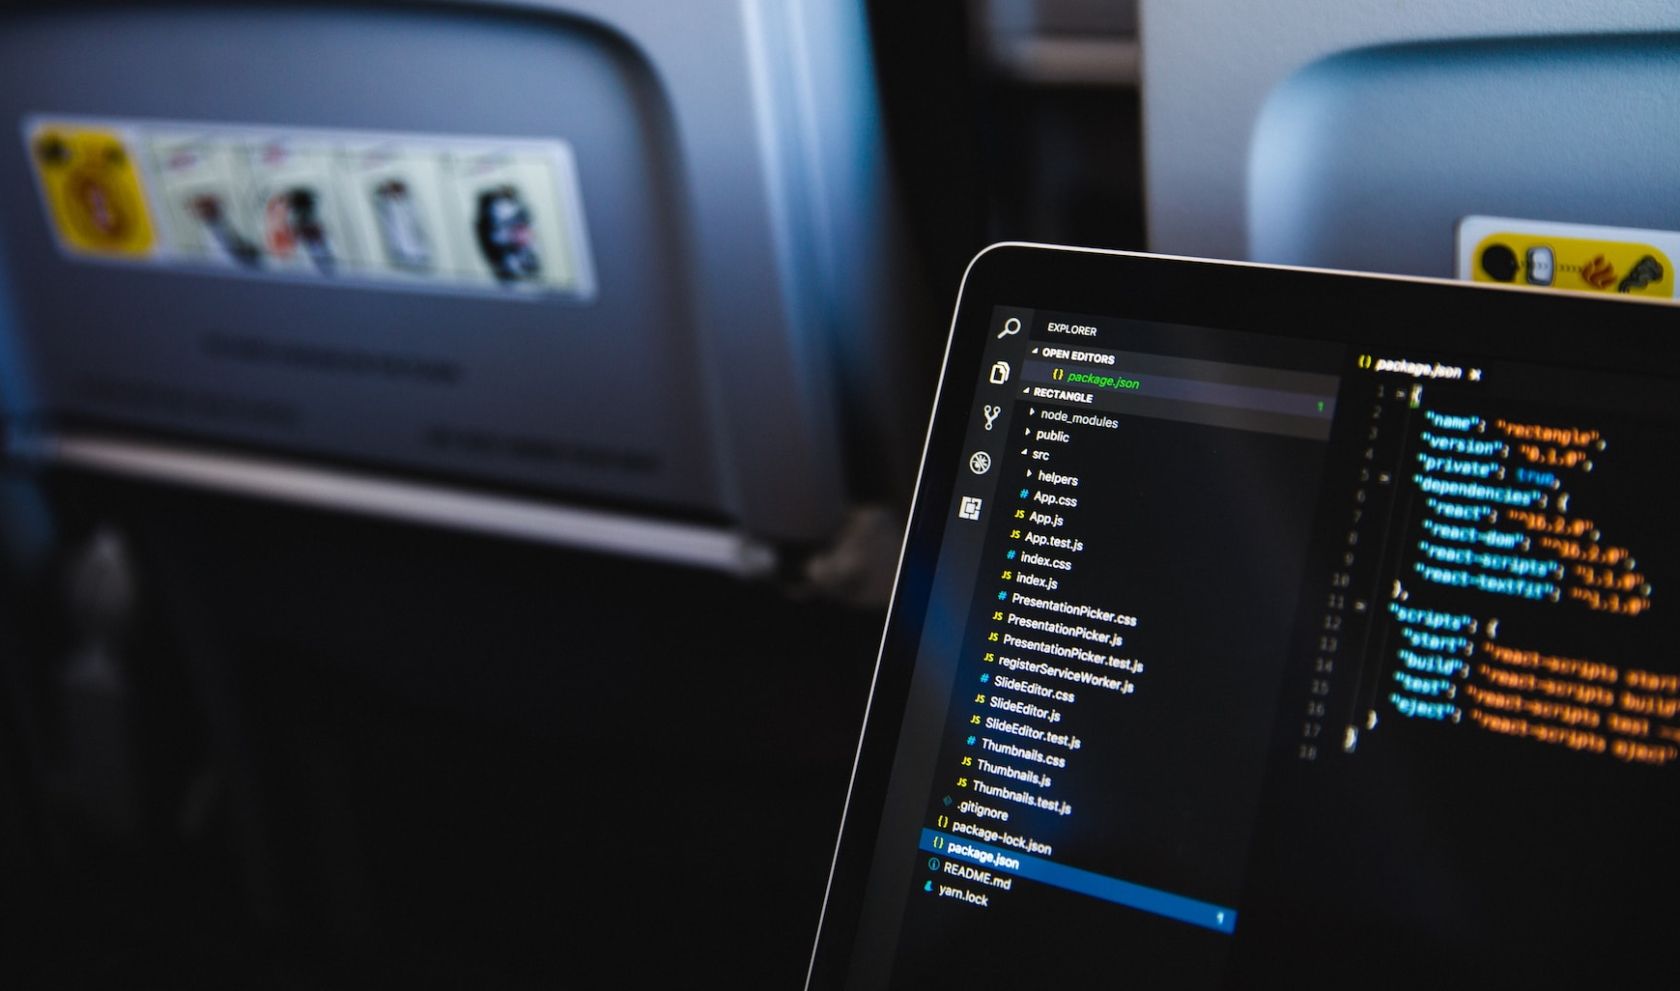 working on a MacBook during a flight